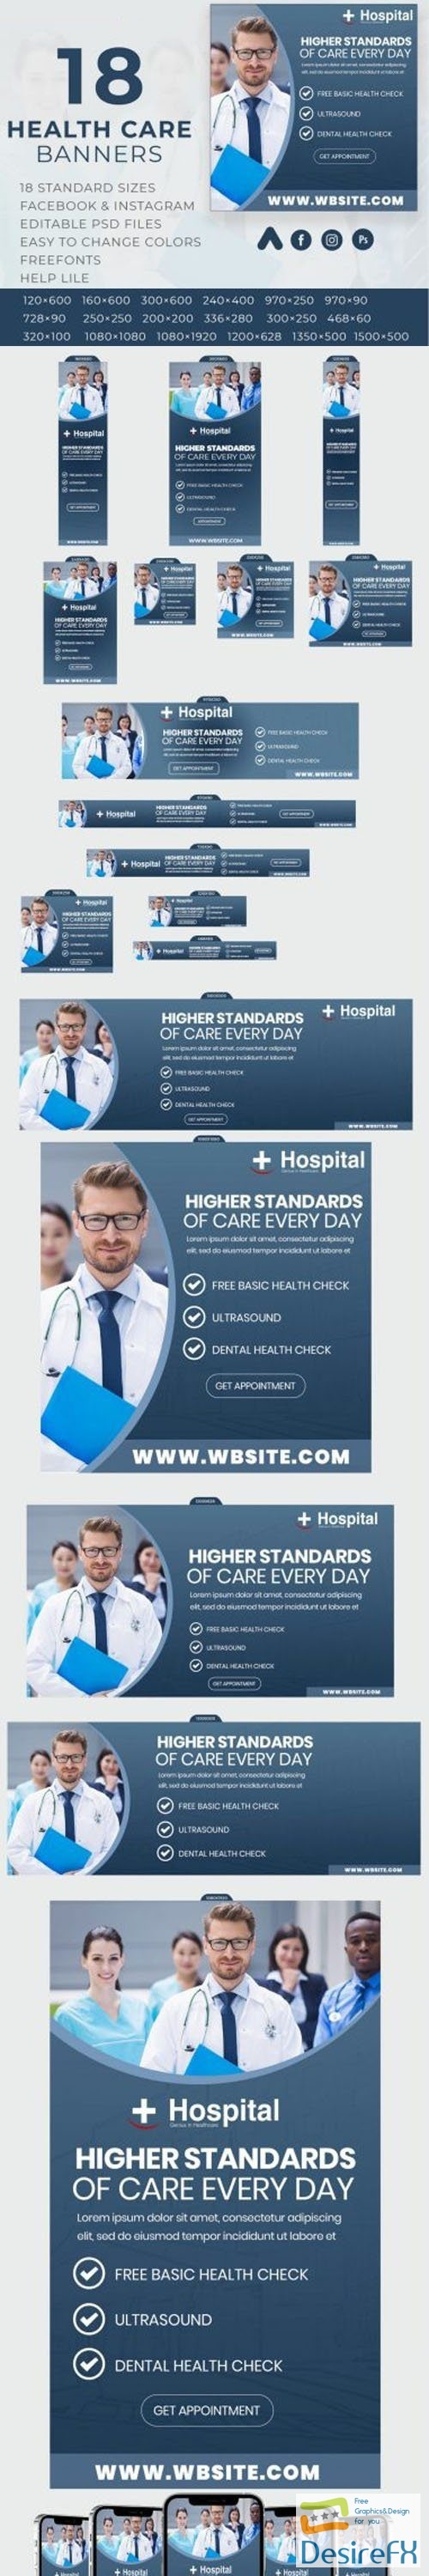 18 Hospitals and Healthcare Banners PSD Templates